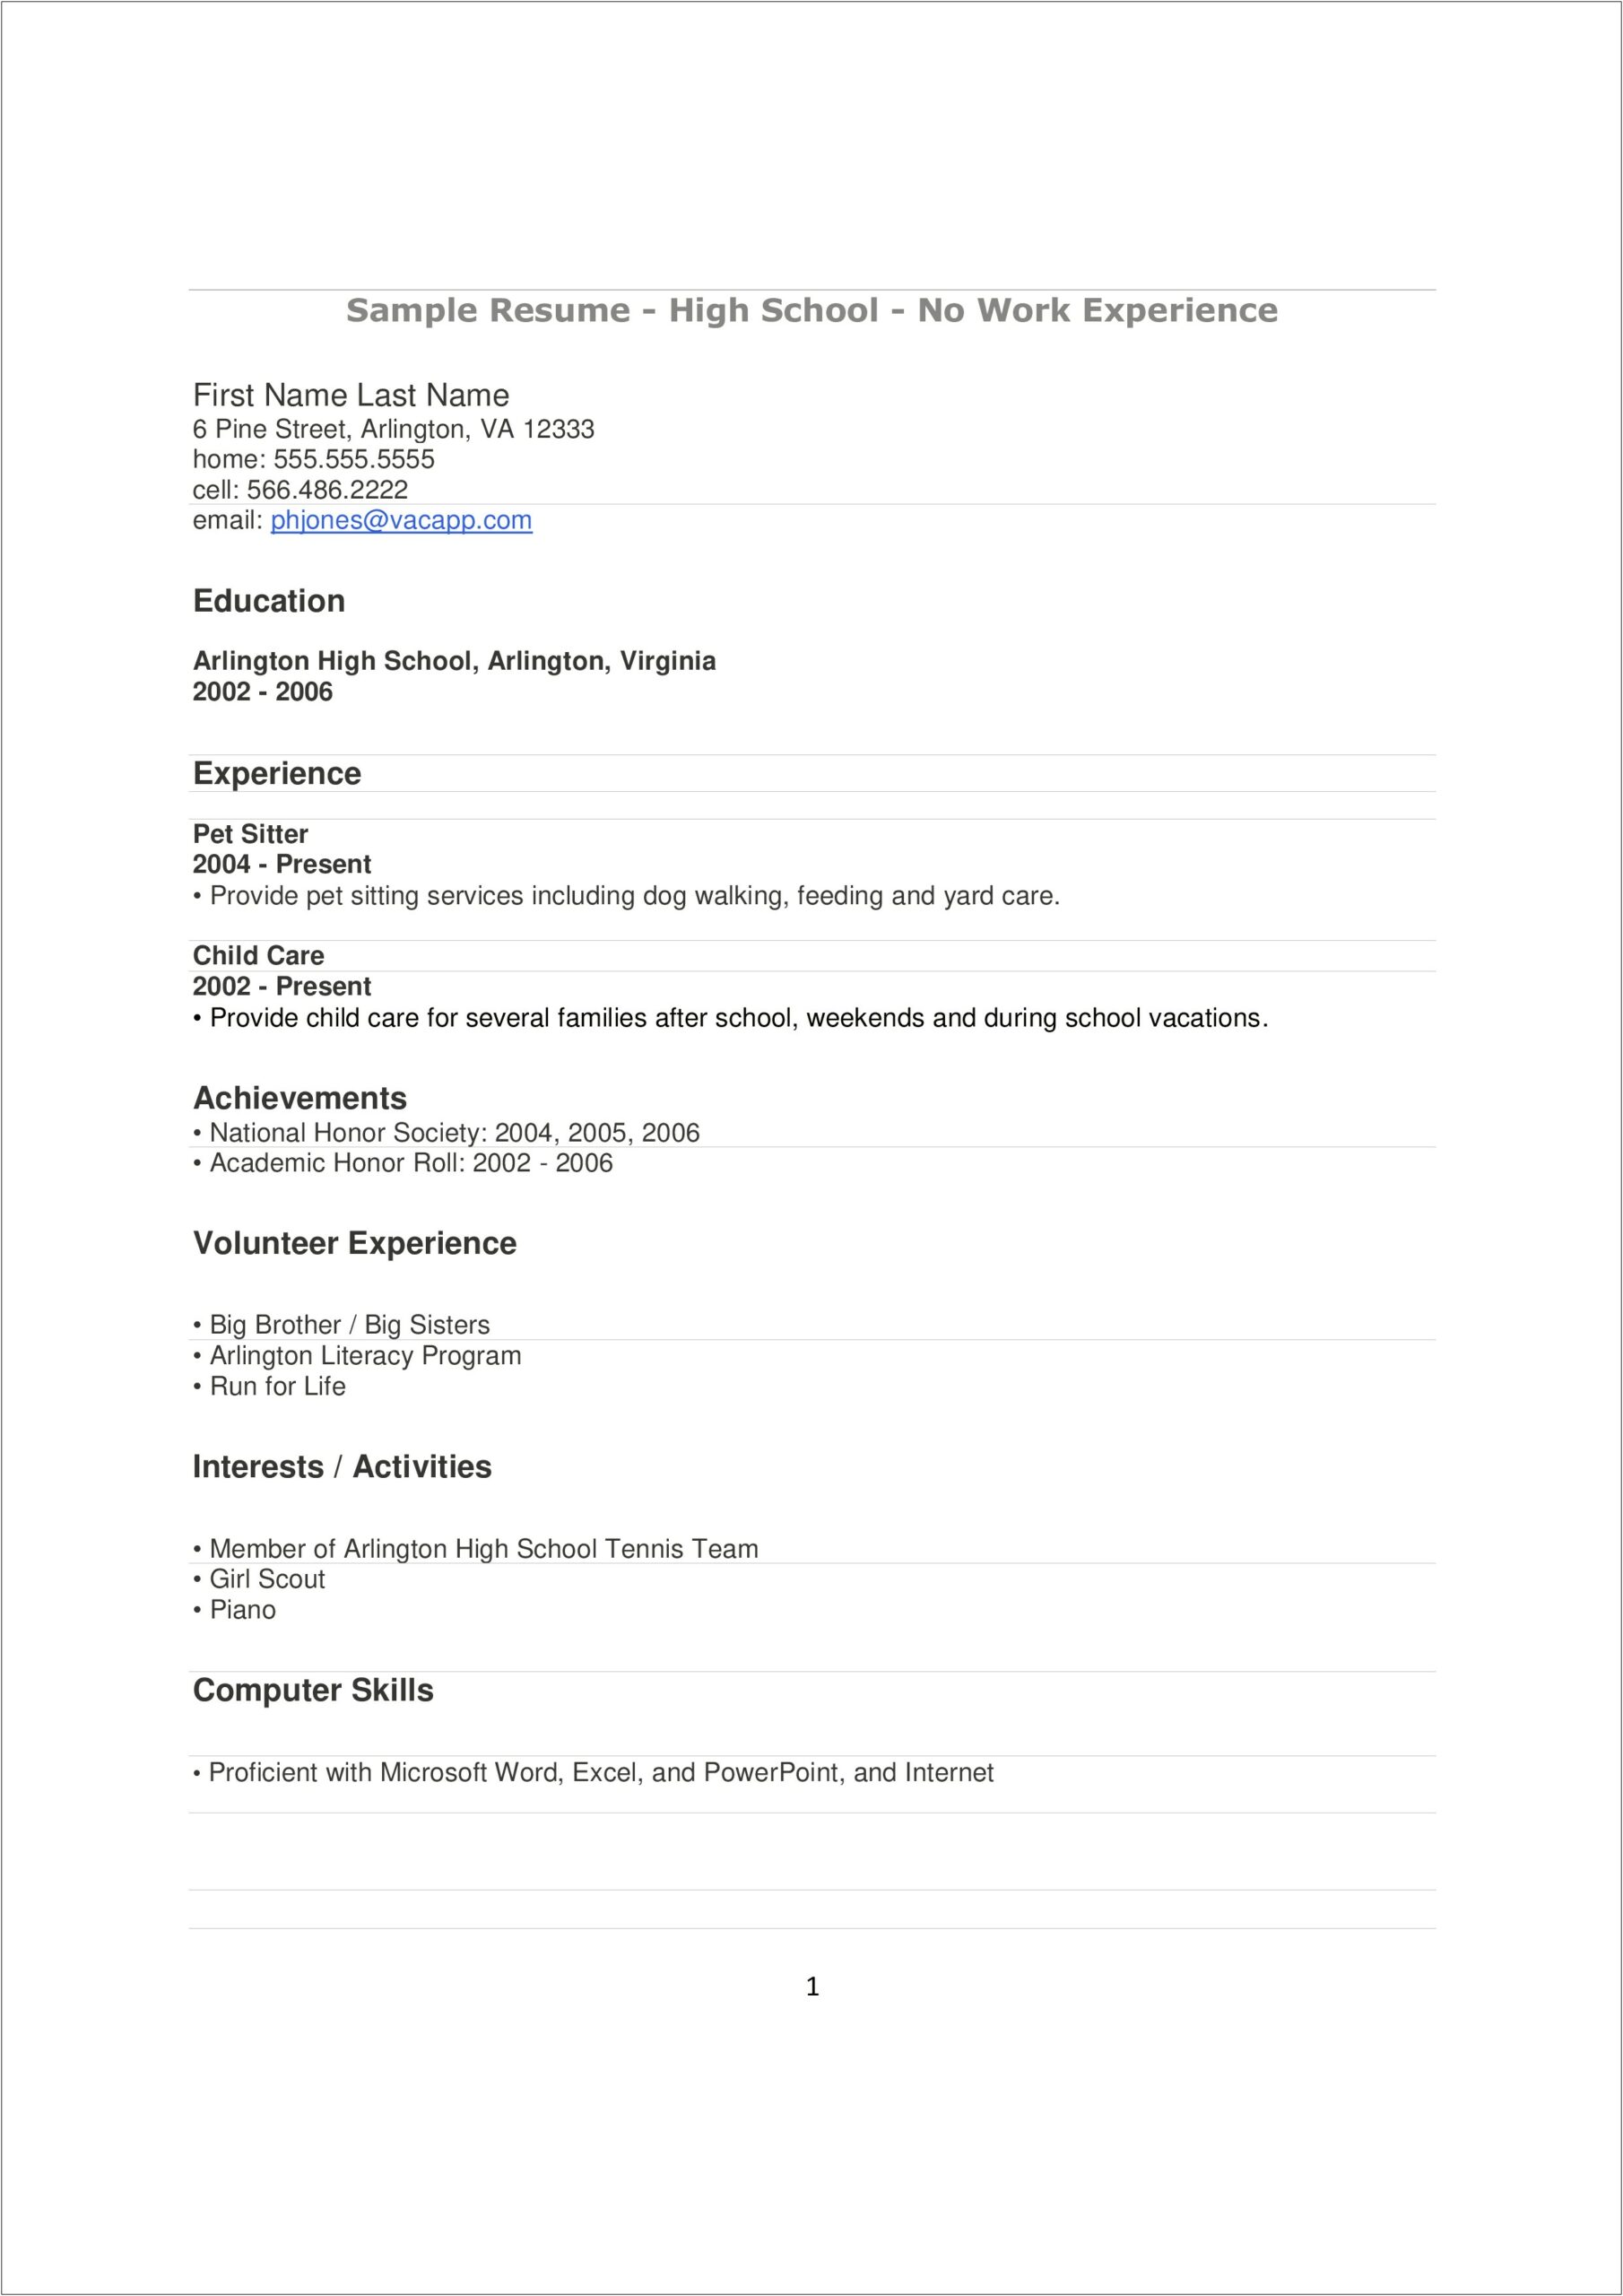 Resume For High School Kid With Little Experience